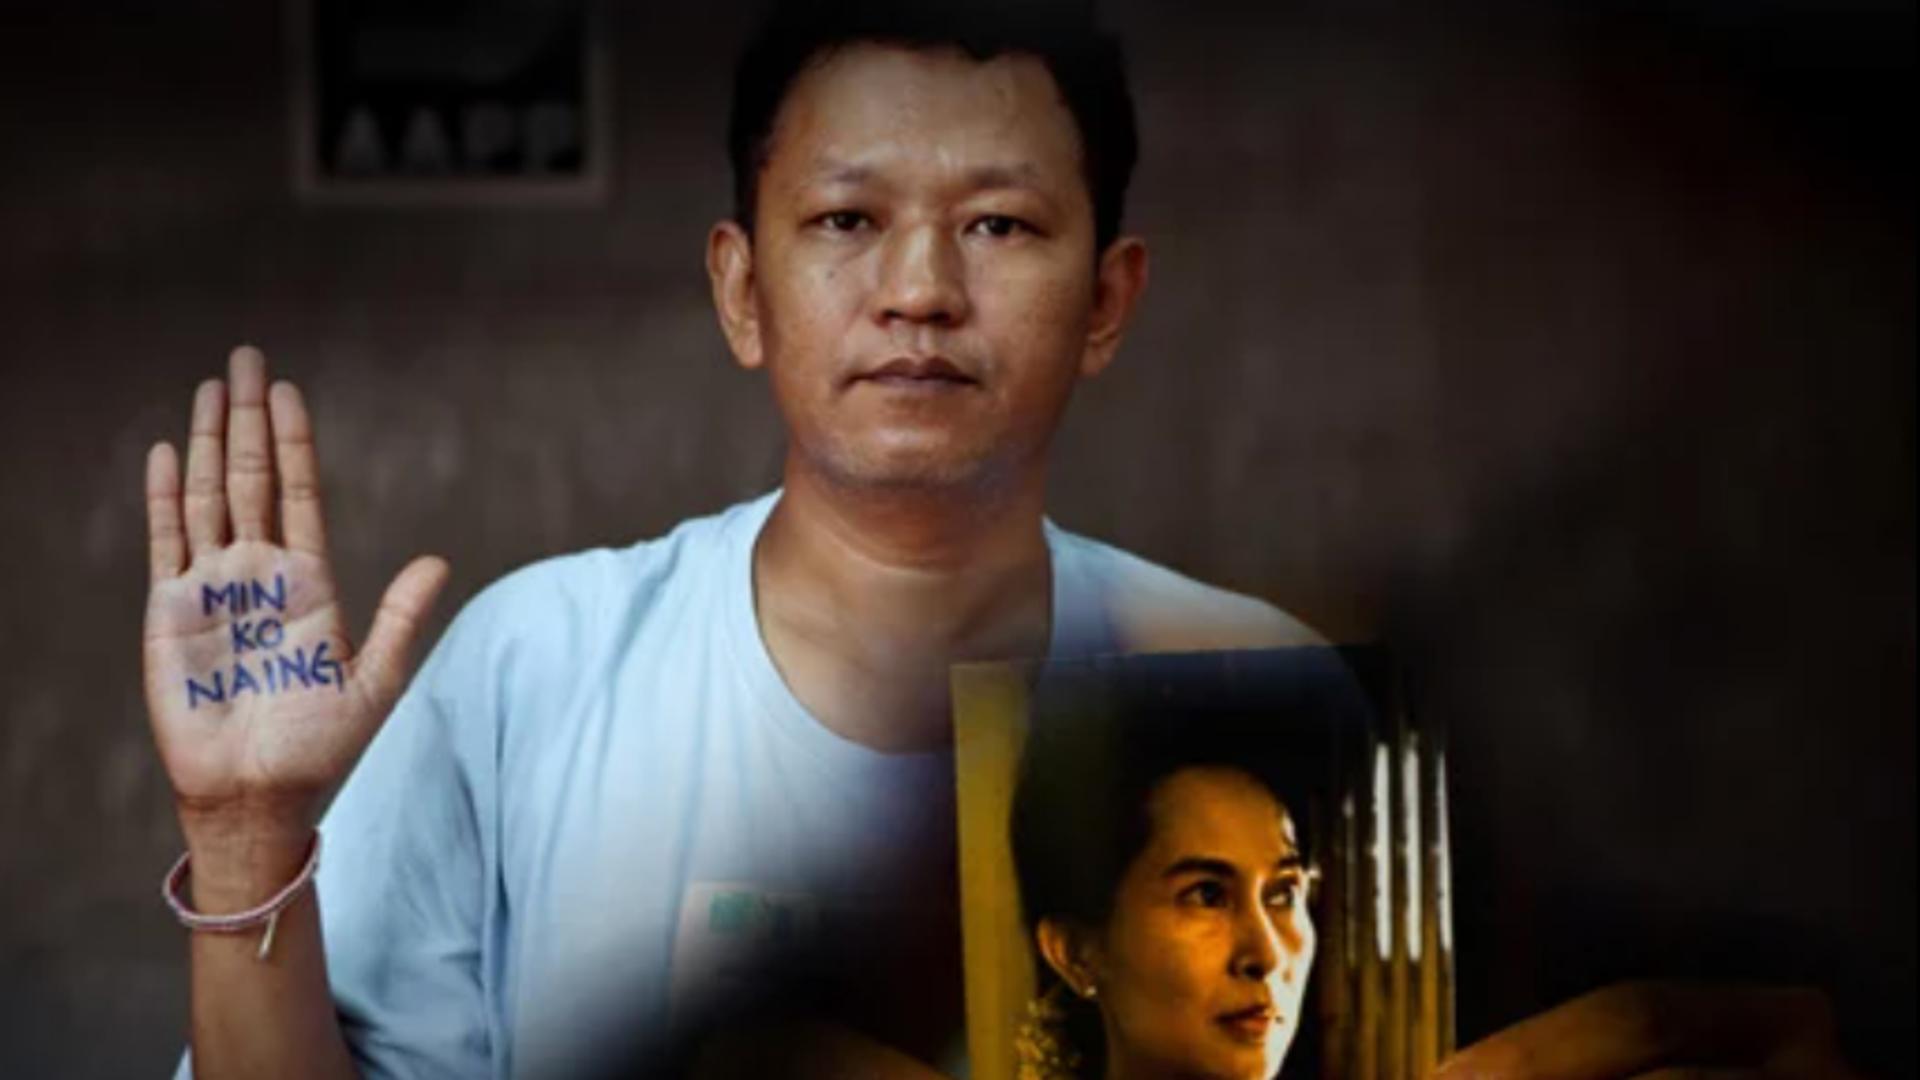 Into the Current: Burma’s Political Prisoners